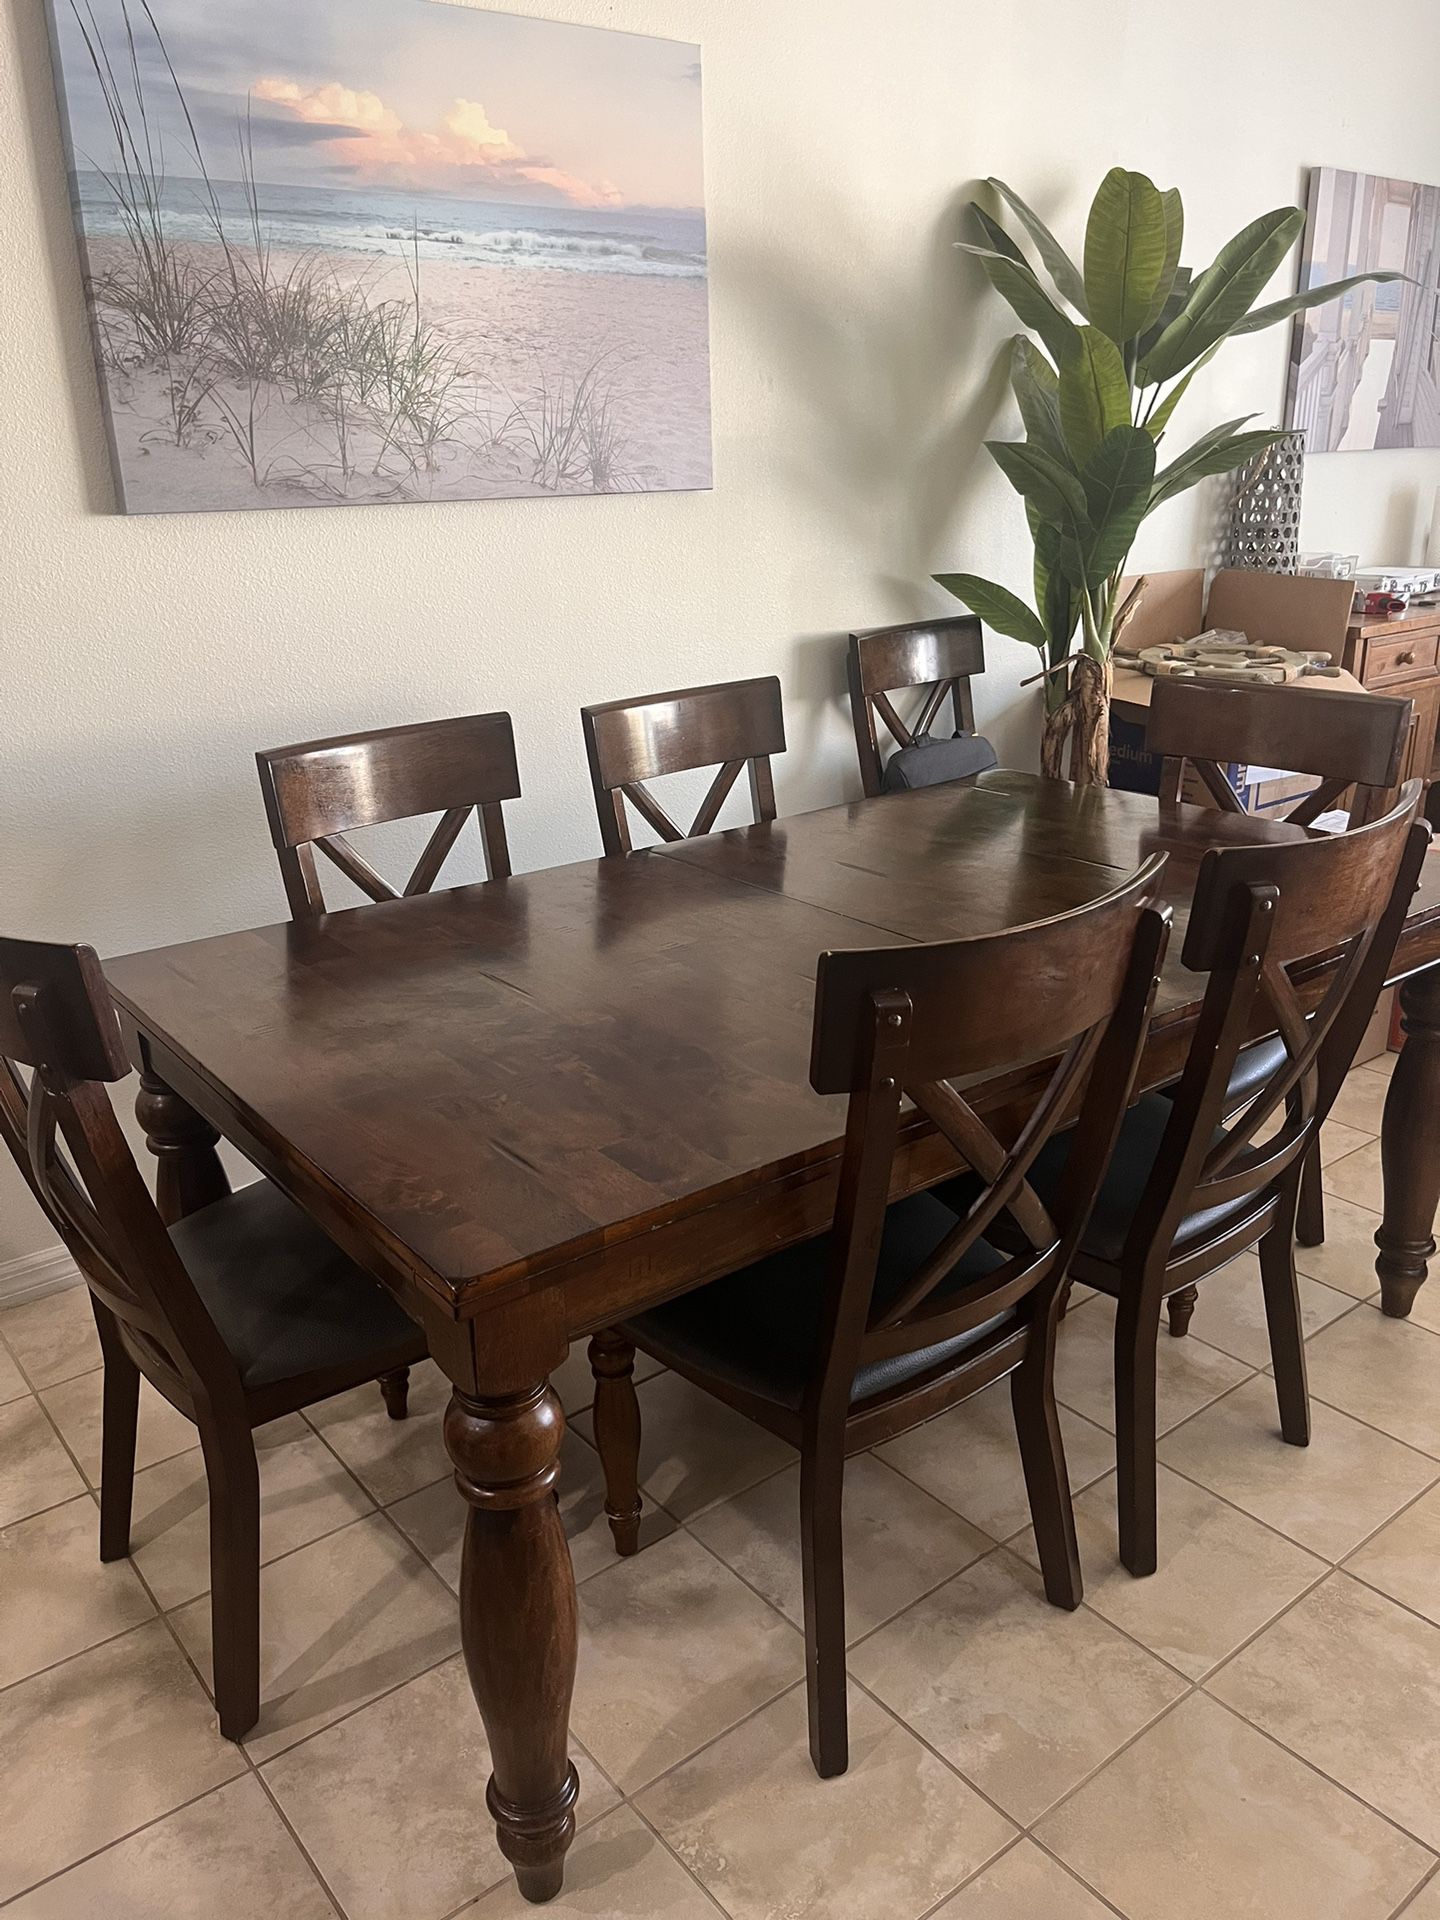 Kitchen Table With 8 Chairs 3 Bar Stools 